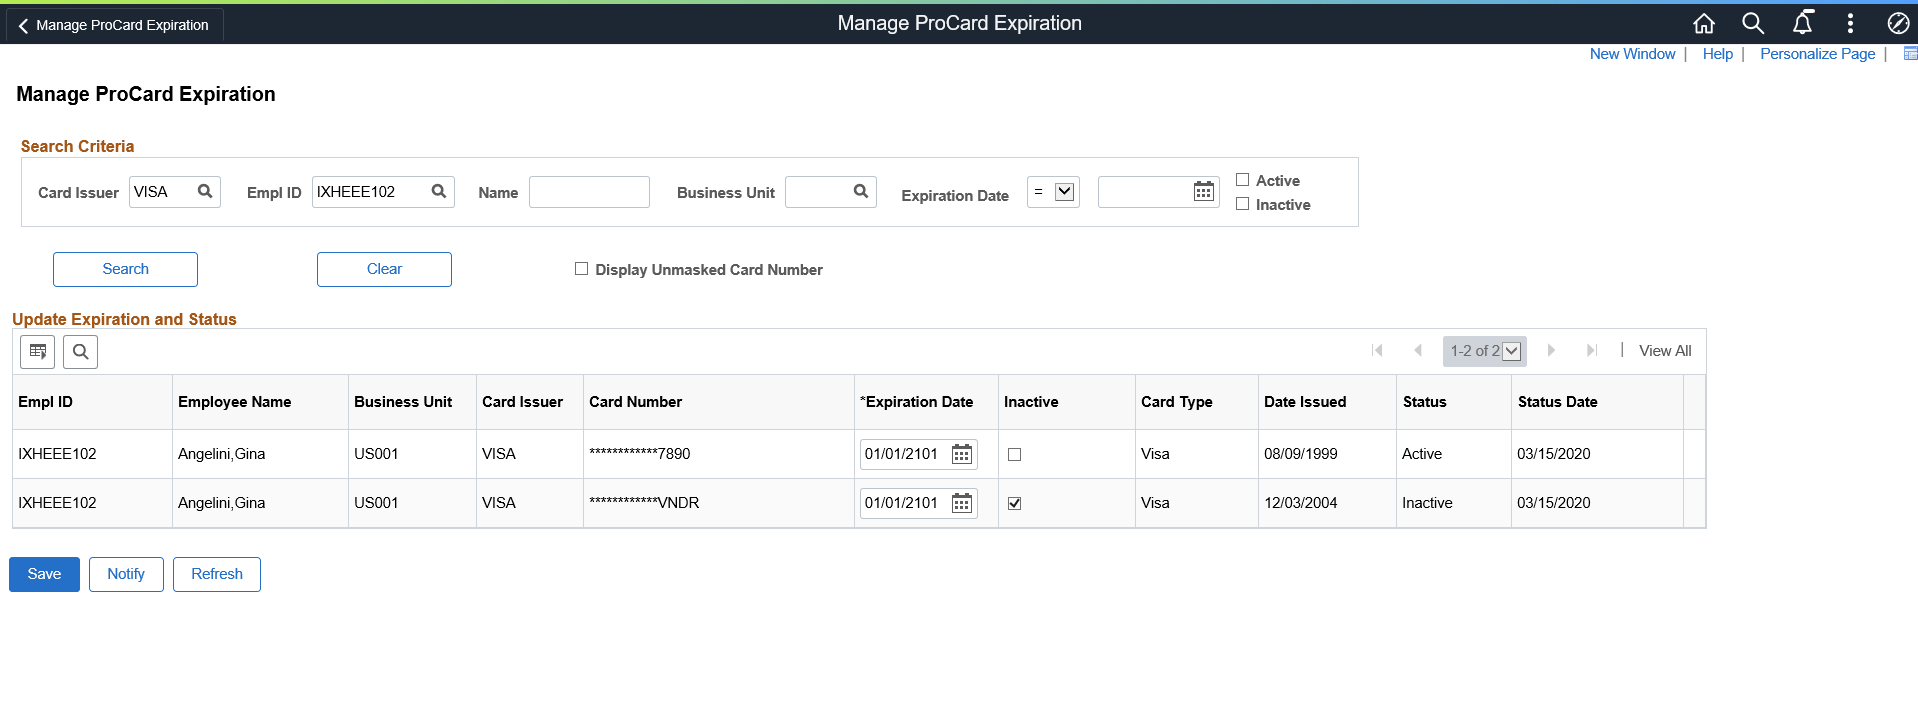 Manage ProCard Expiration page